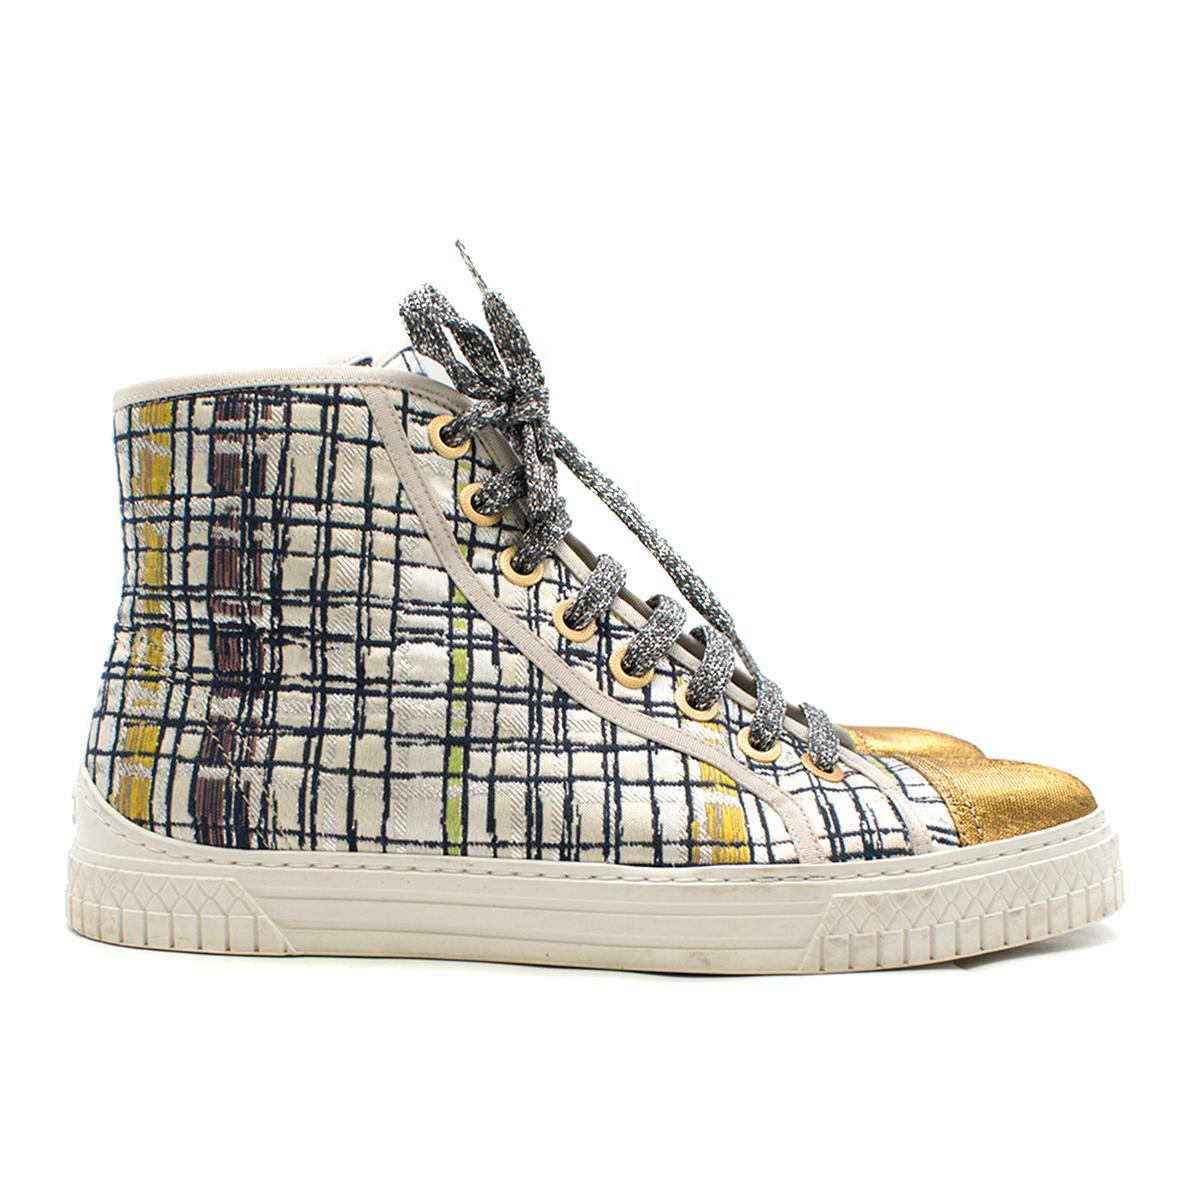 Chanel Metallic Tweed High-Top Sneakers

- Multi-coloured metallic tweed high top sneakers
- Shiny gold toe cap
- Shimmery silver front lace up
- Geometric pattern
- CC logo at the back
- 'Chanel' embroidered on the sides
- White leather lining with